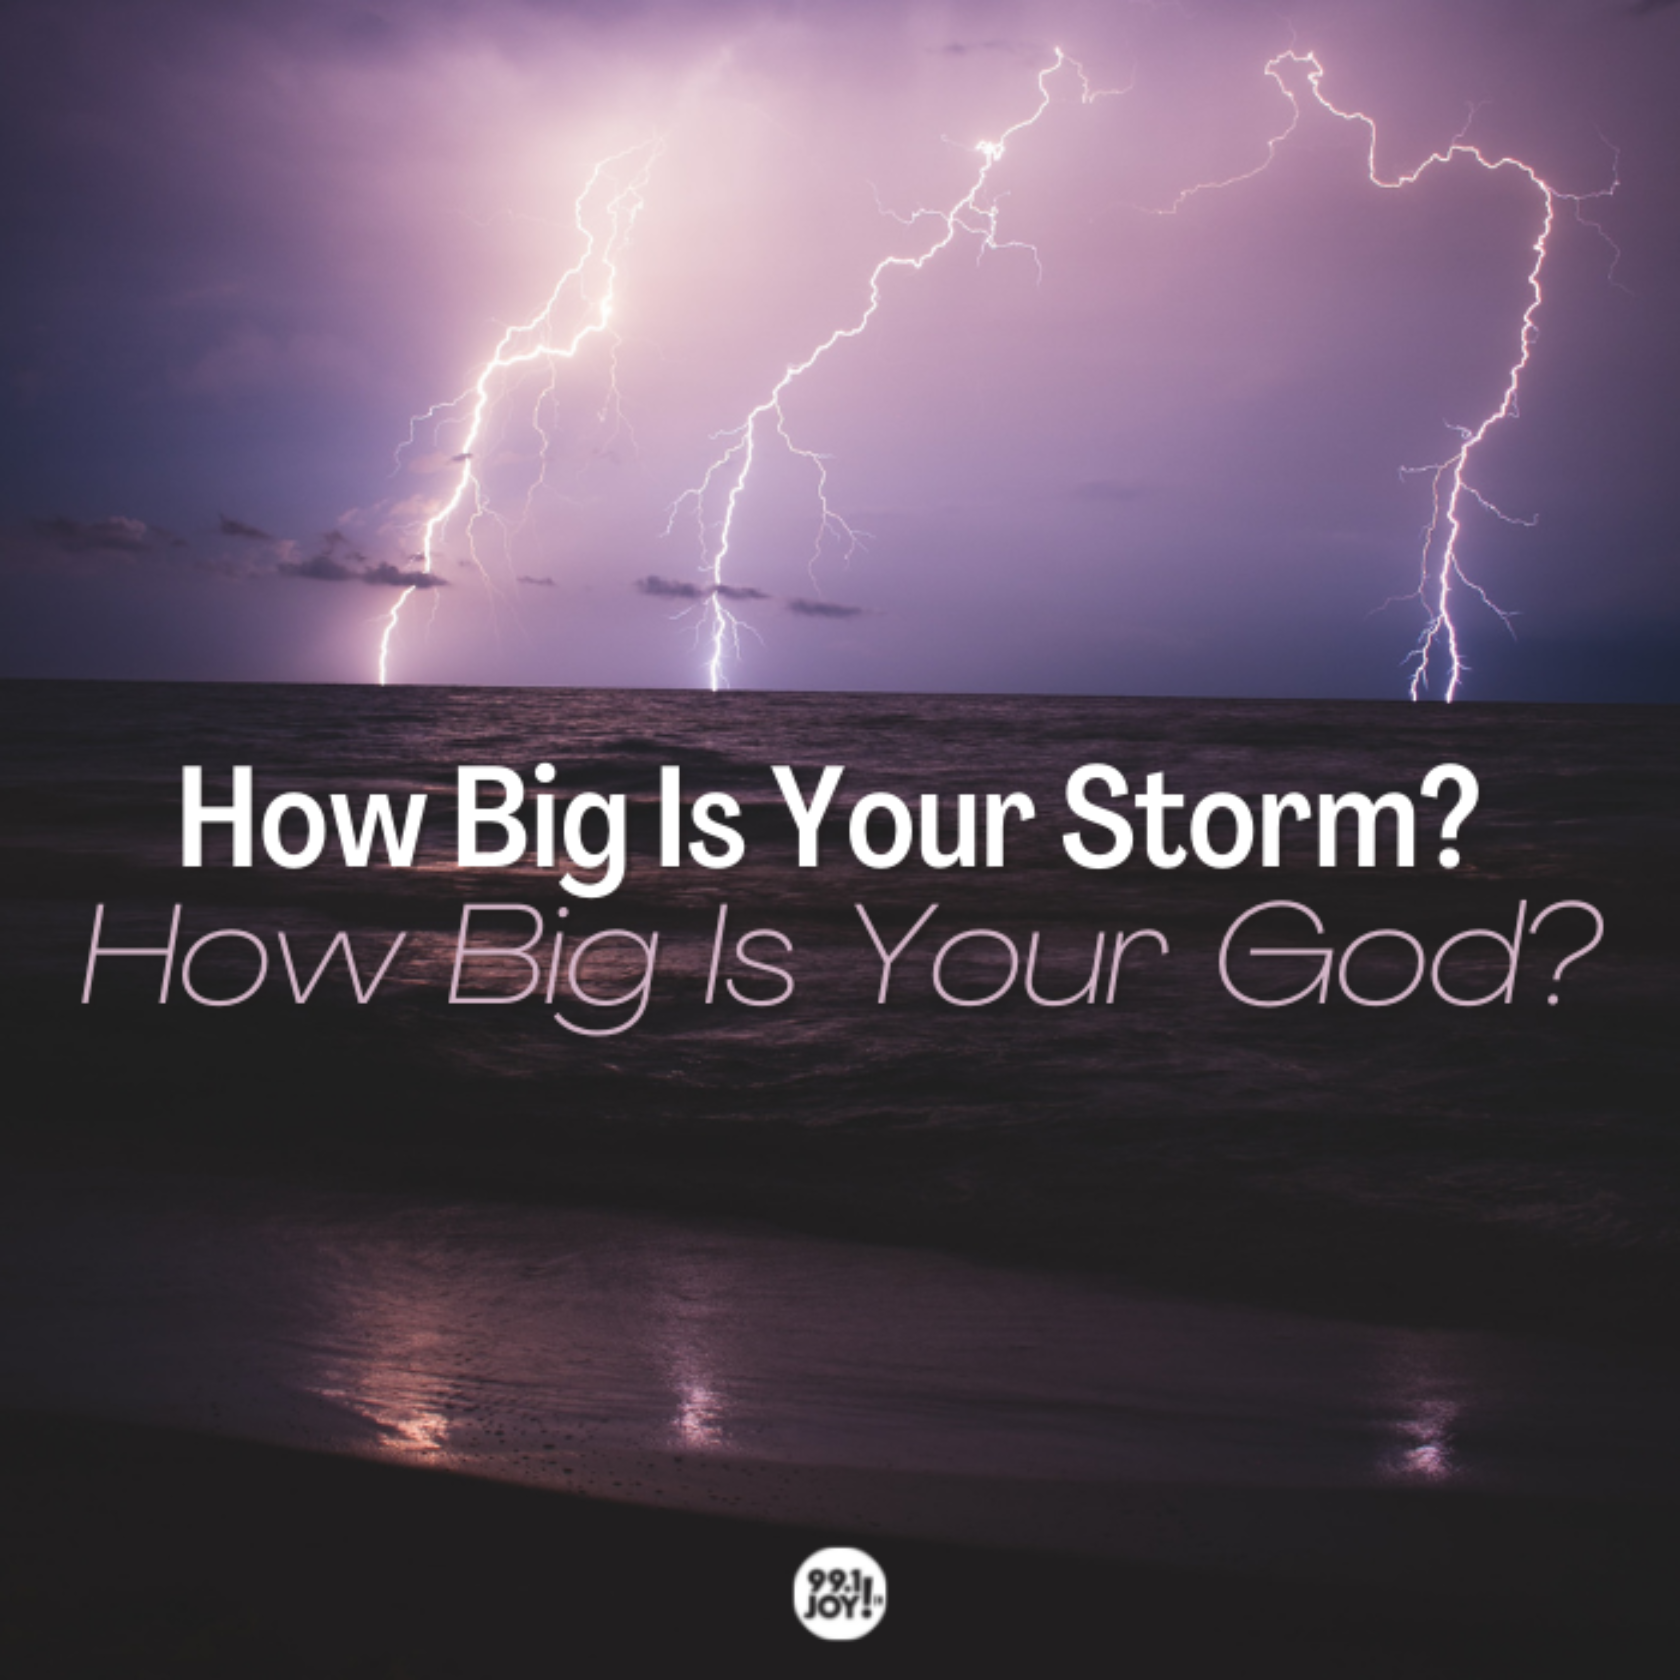 How Big Is Your Storm? How Big Is Your God?